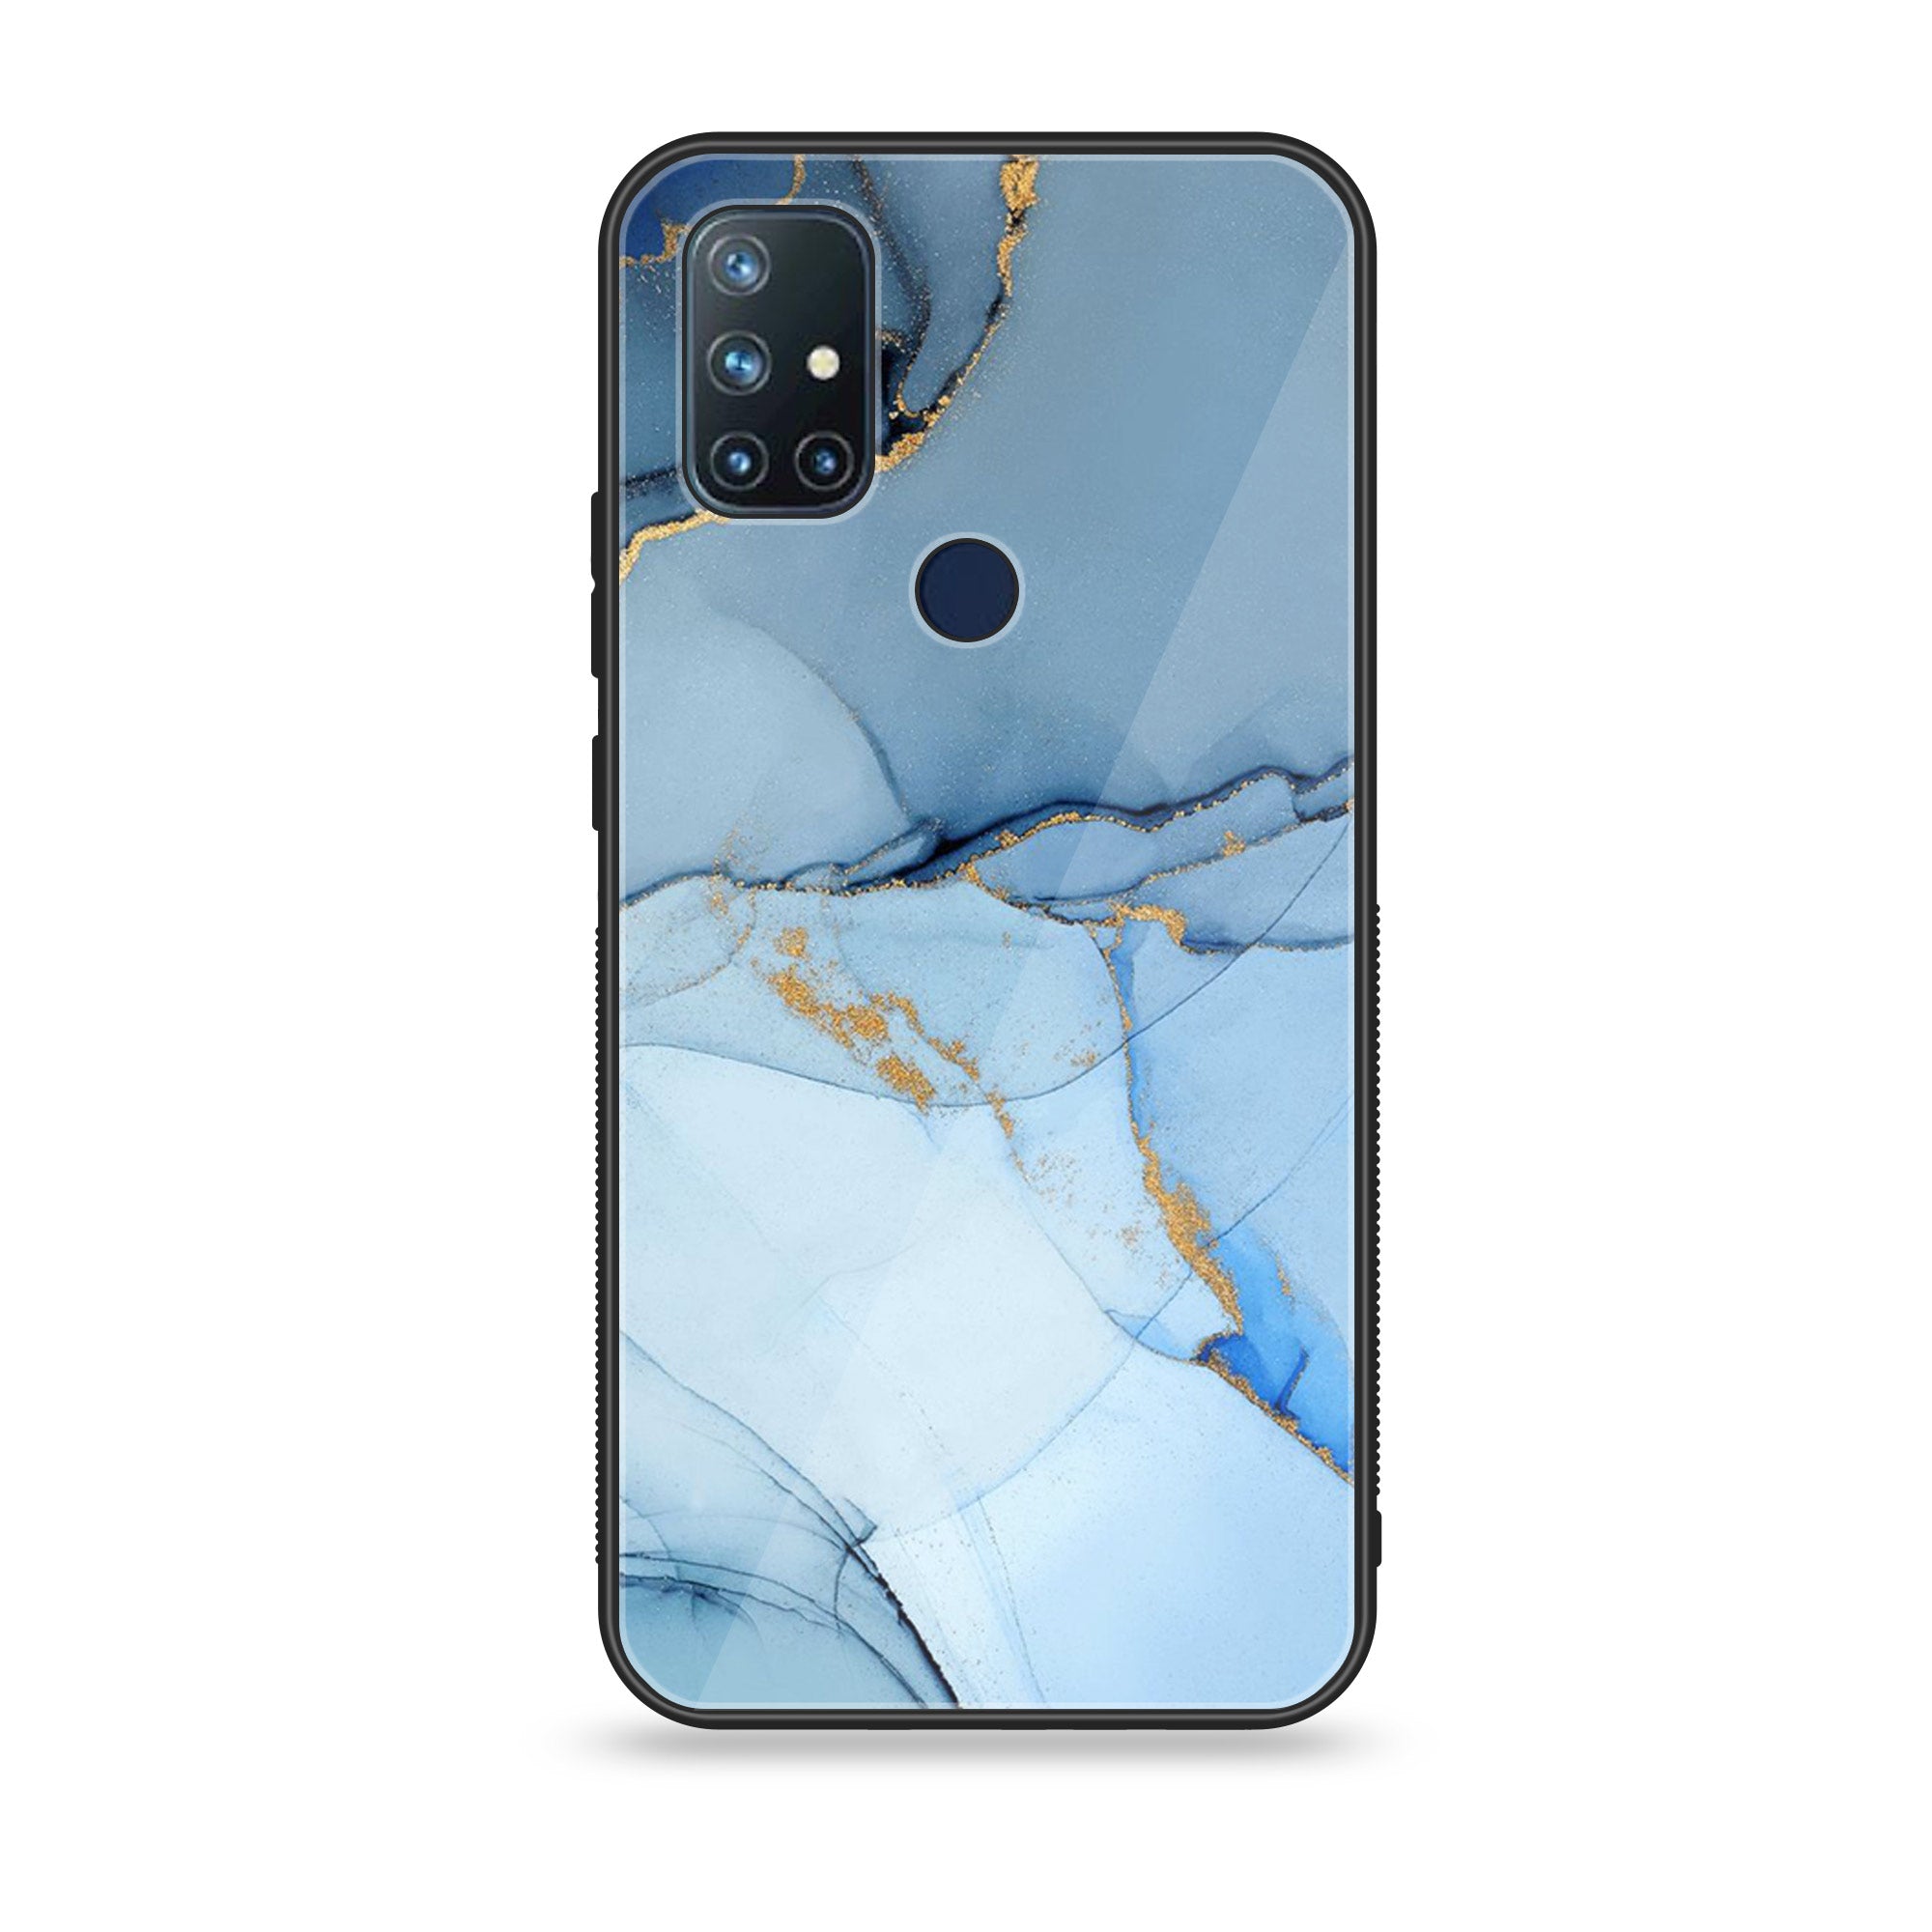 OnePlus Nord N10- Blue Marble Series - Premium Printed Glass soft Bumper shock Proof Case